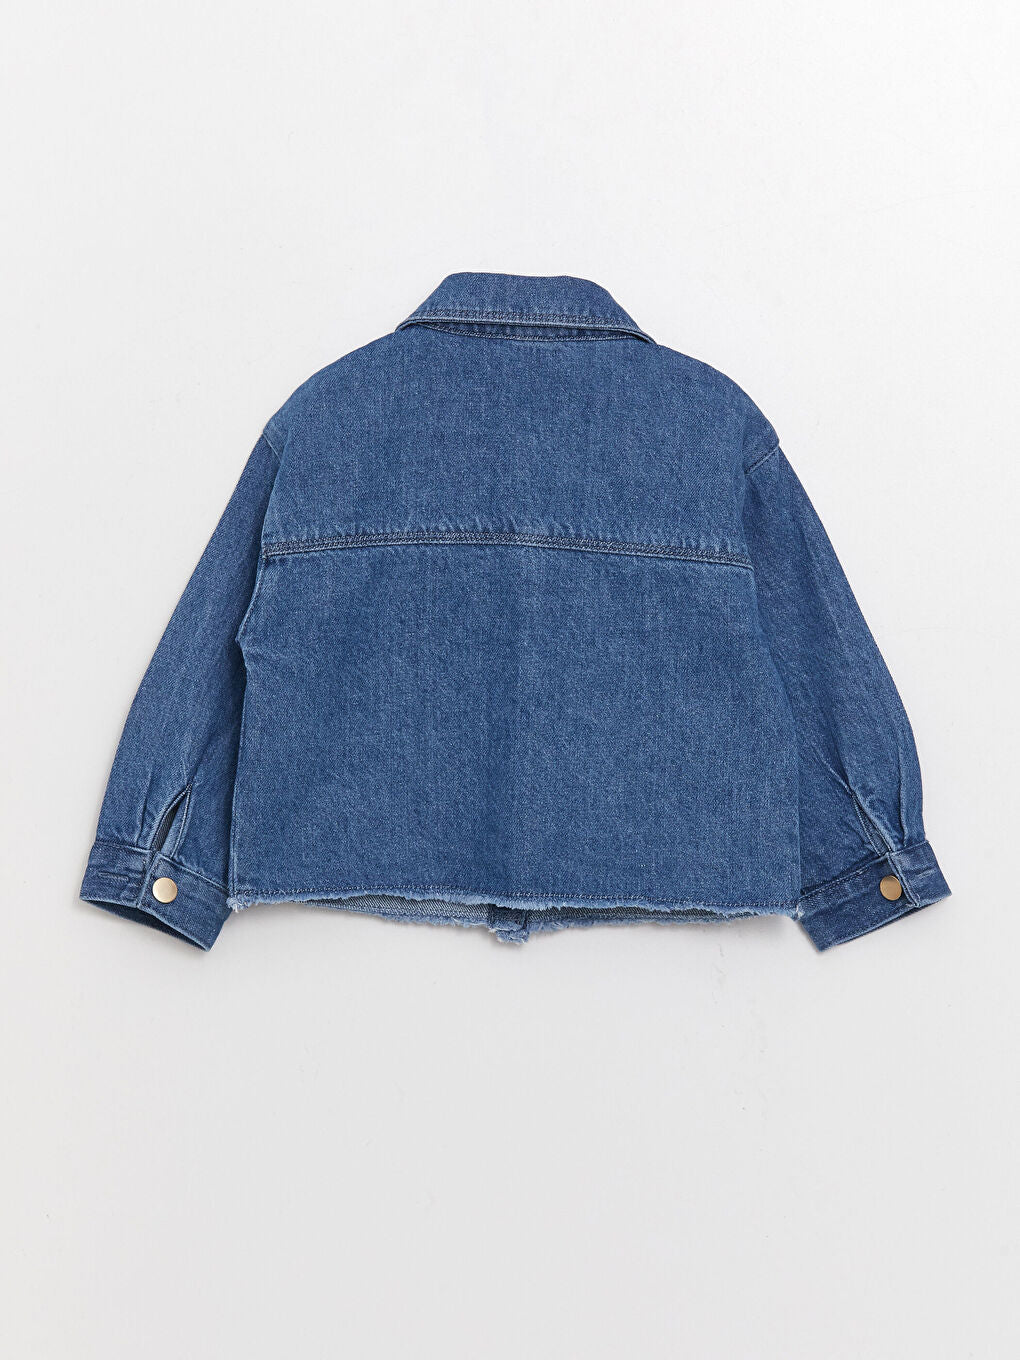 Shirt Collar Embroidered Baby Girl Jean Jacket